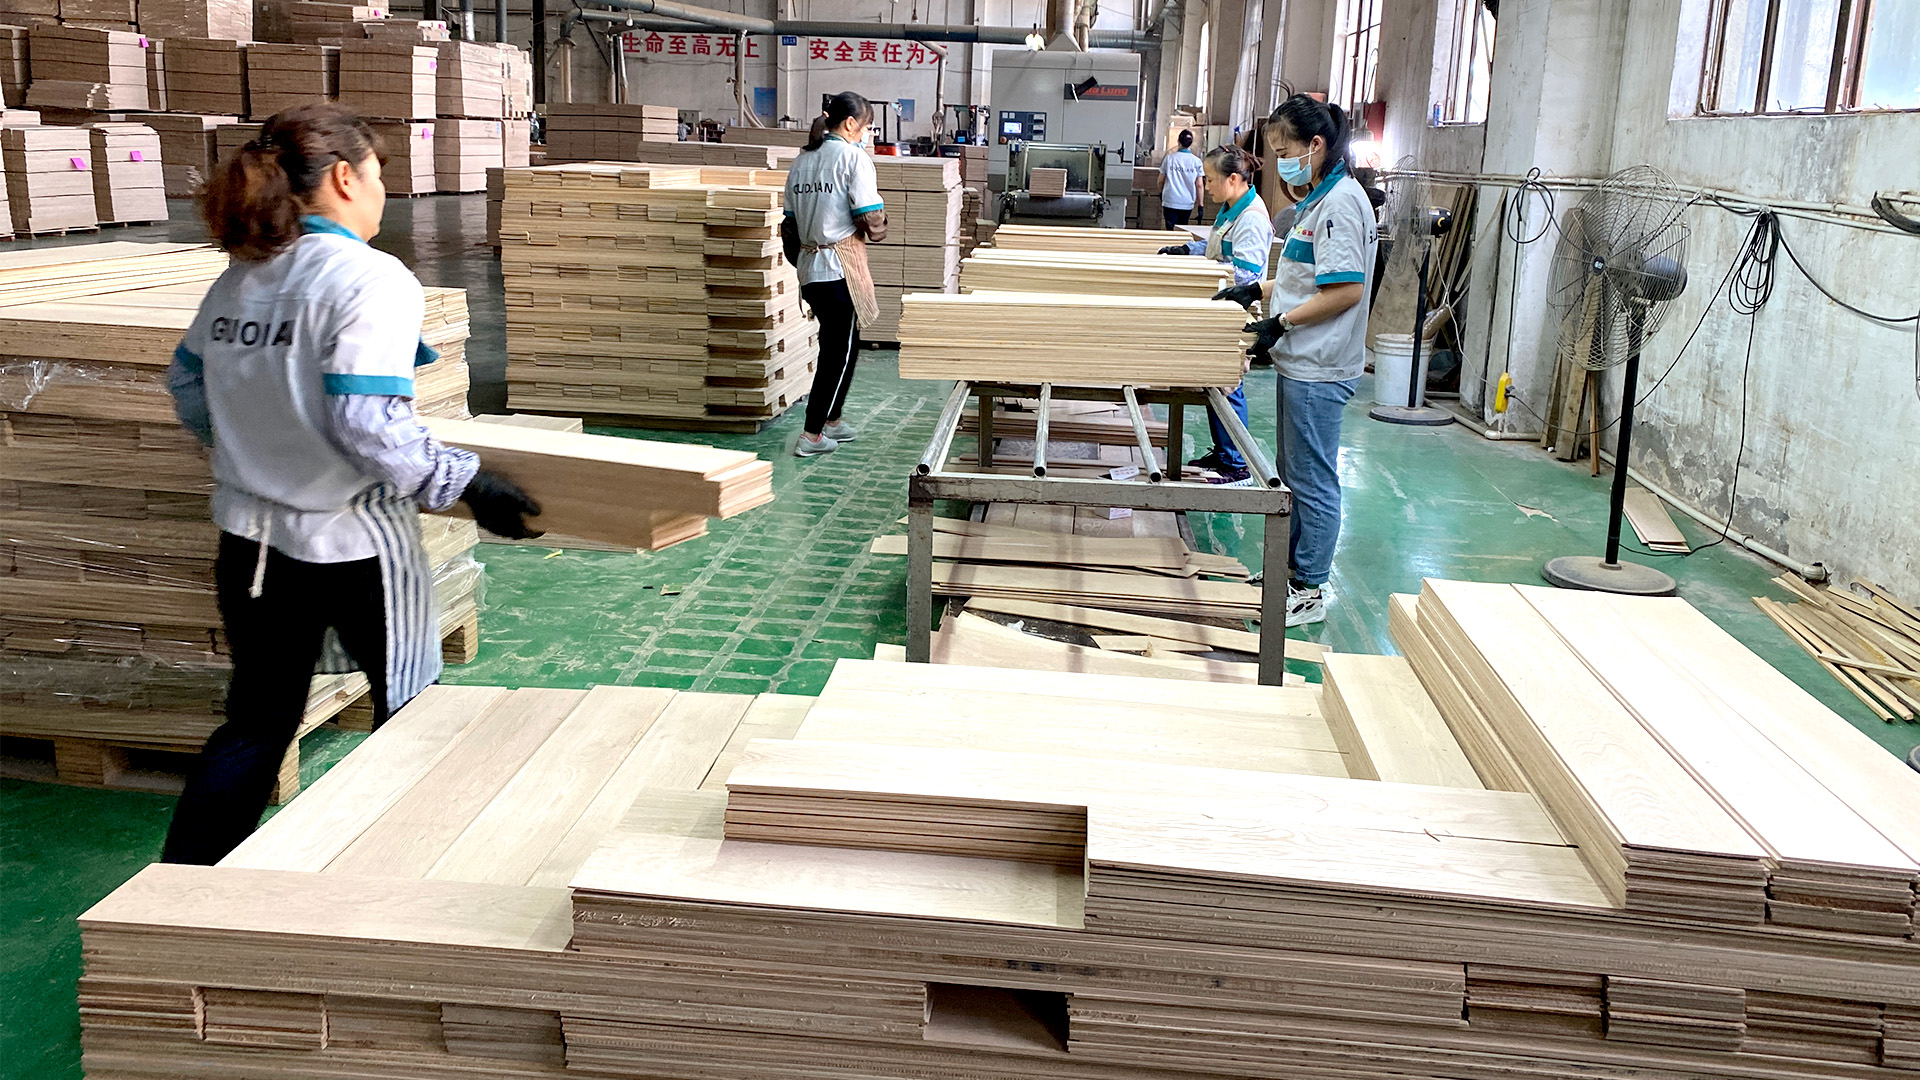 Oak veneer are being classified with A, B, C, D, E grades according to highest grading rules on the market.